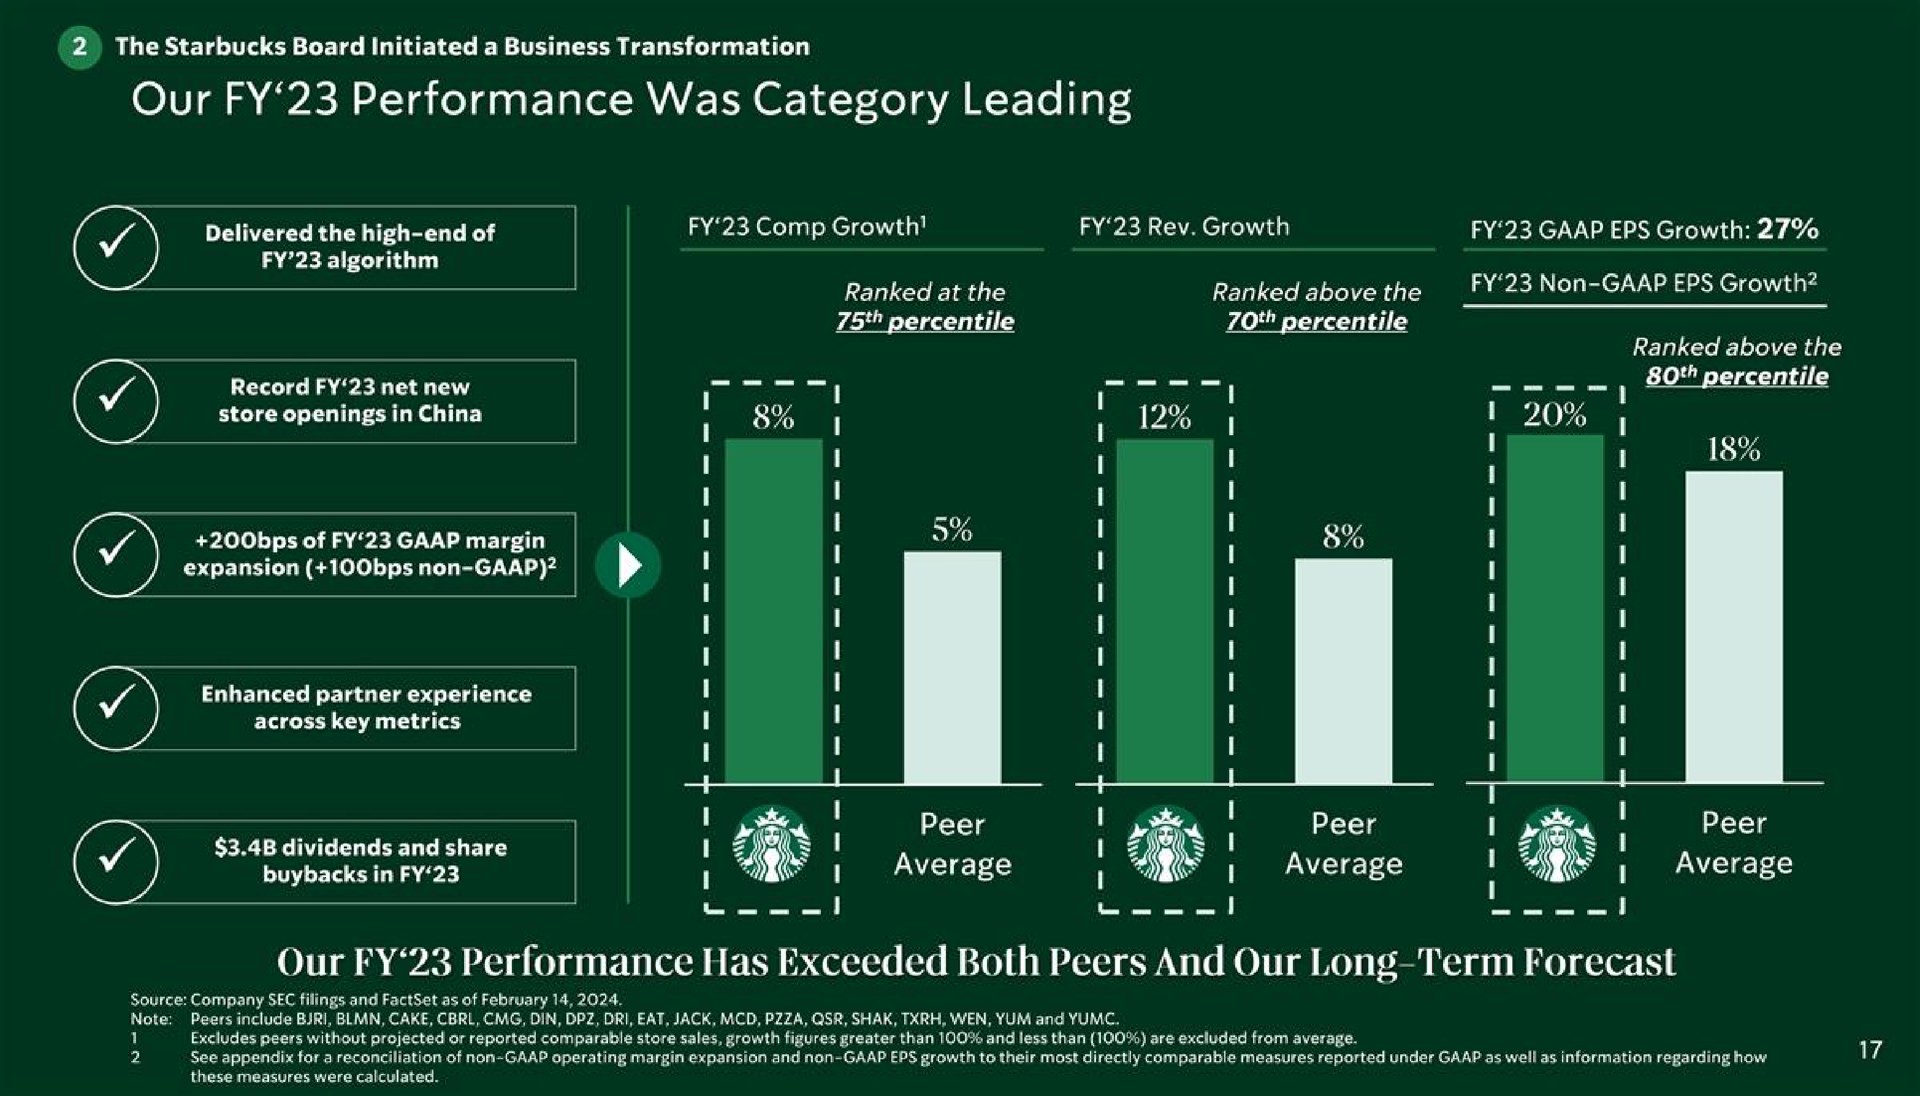 our performance was category leading of margin a a a peer brey our performance has exceeded both peers and our long term forecast | Starbucks